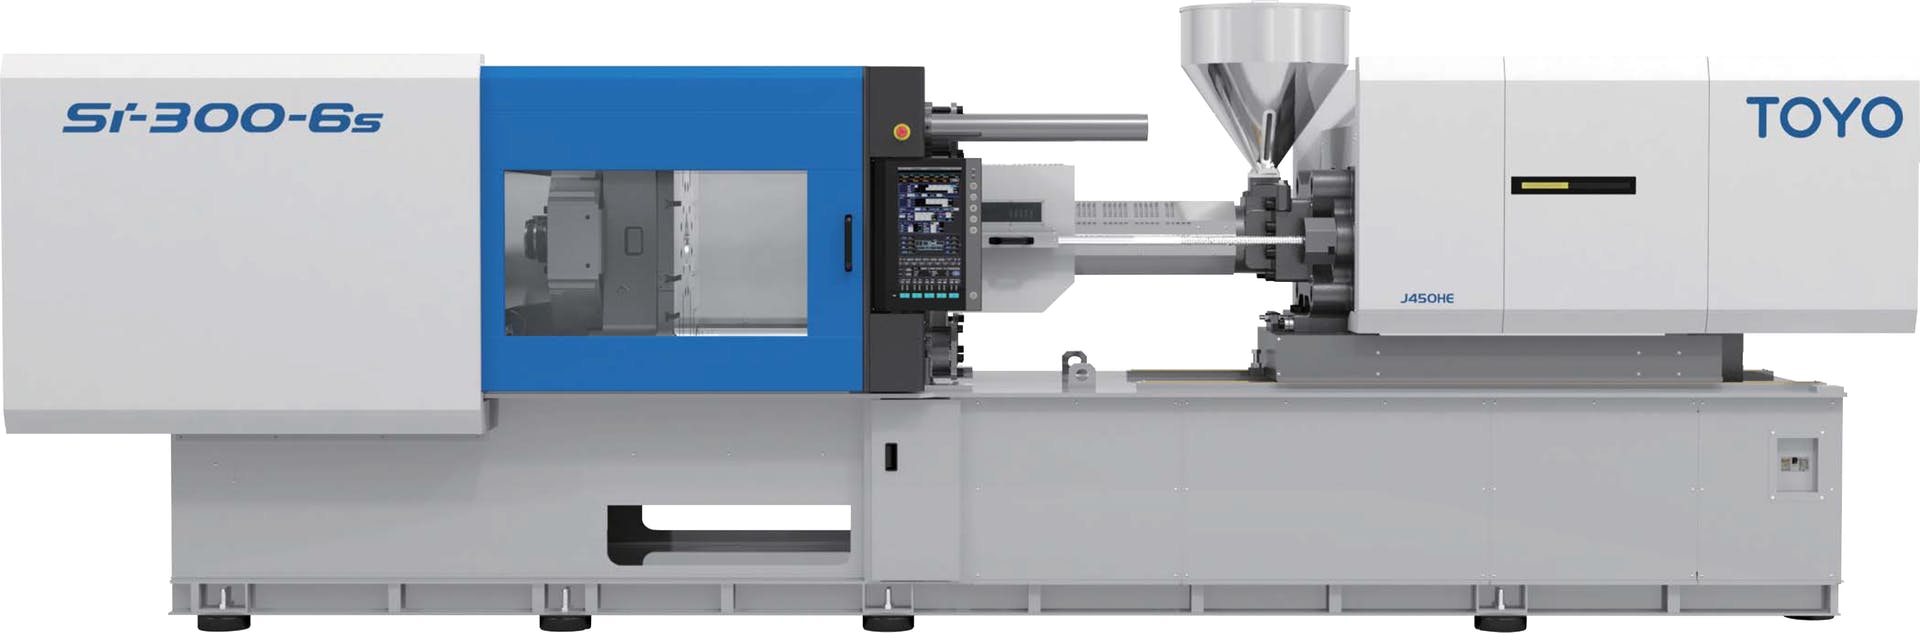 New Toyo presses offer numerous features | Plastics Machinery   Manufacturing